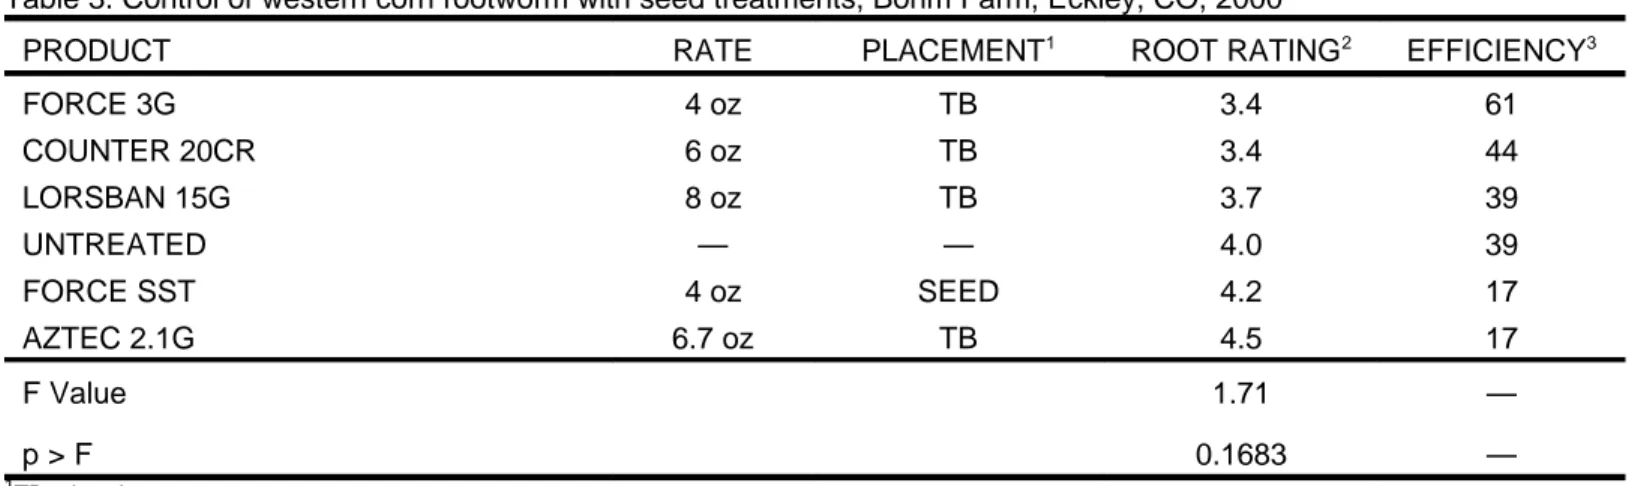 Table 3. Control of western corn rootworm with seed treatments, Bohm Farm, Eckley, CO, 2000